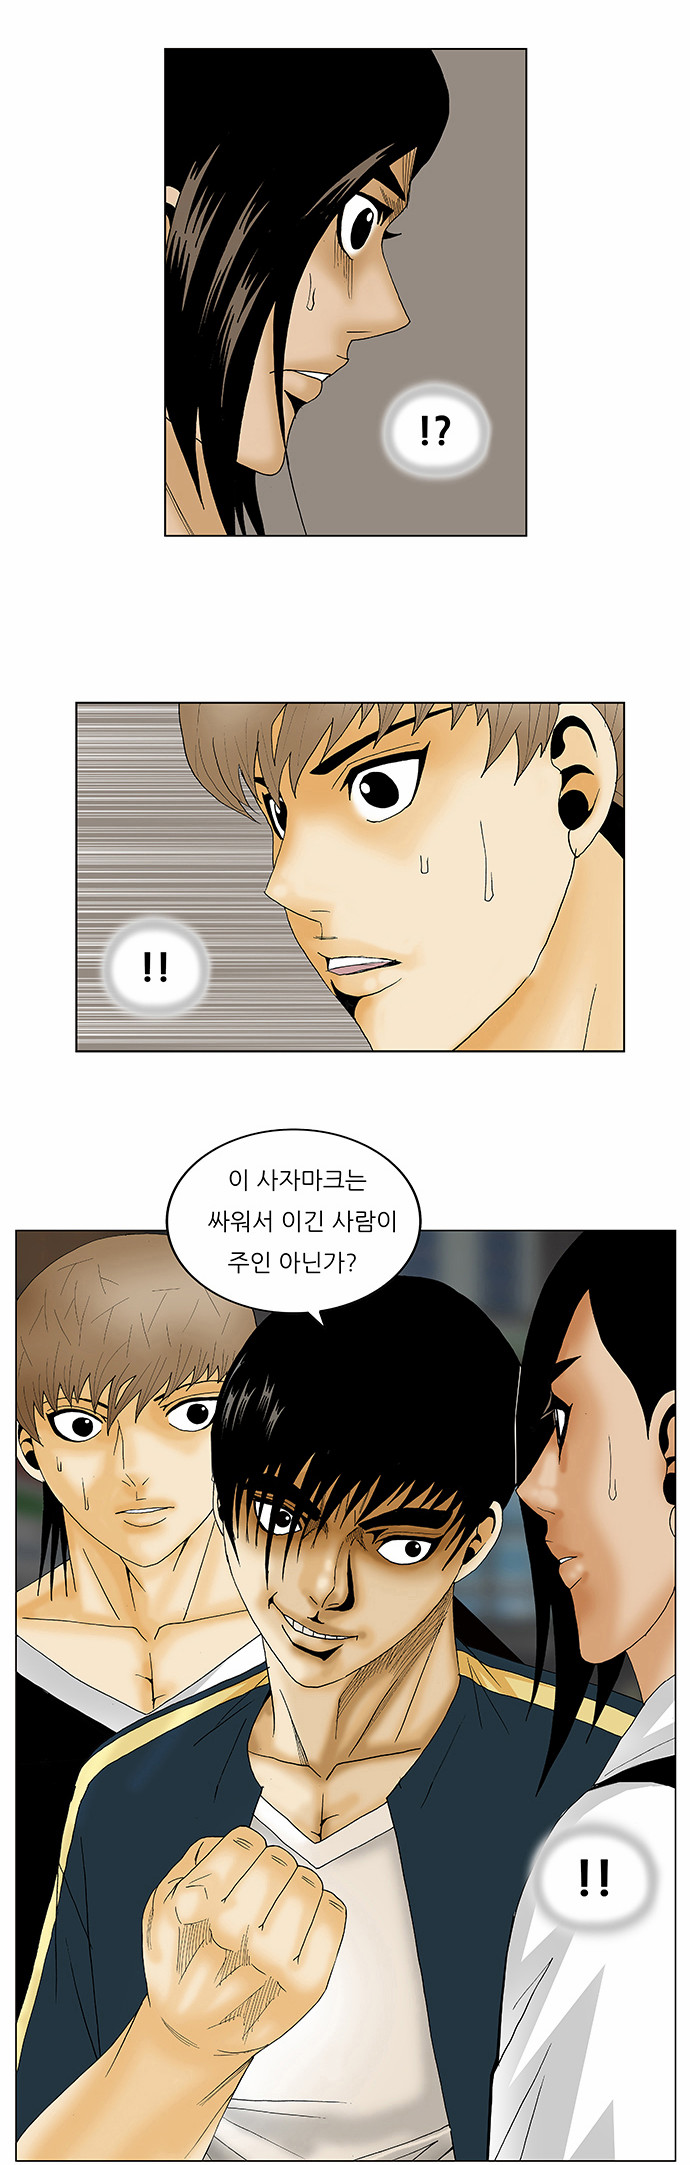 Ultimate Legend - Kang Hae Hyo - Chapter 134 - Page 2